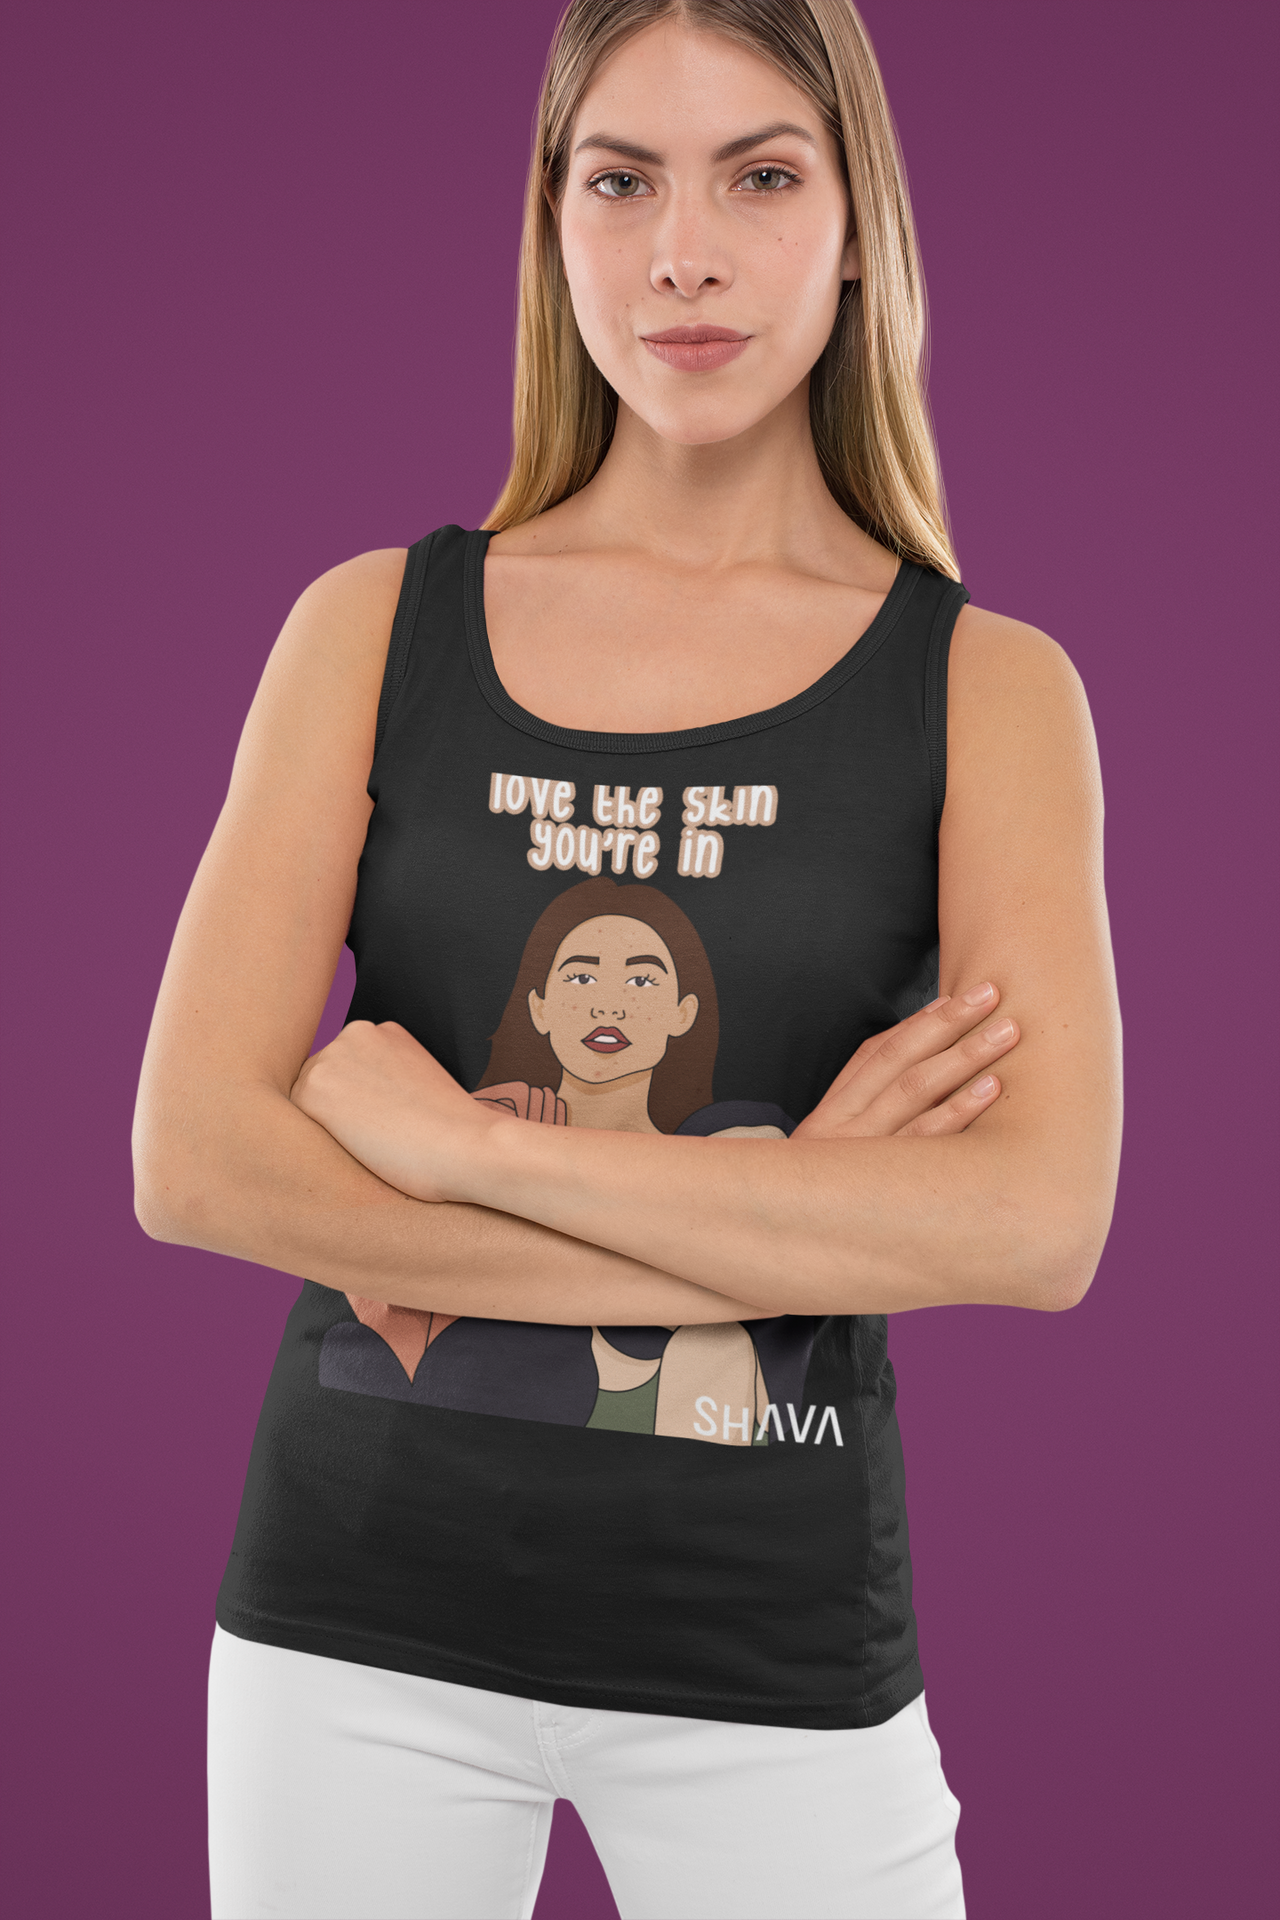 Affirmation Feminist Pro Choice Tank Top Women’s Size – Love The Skin You're In Printify